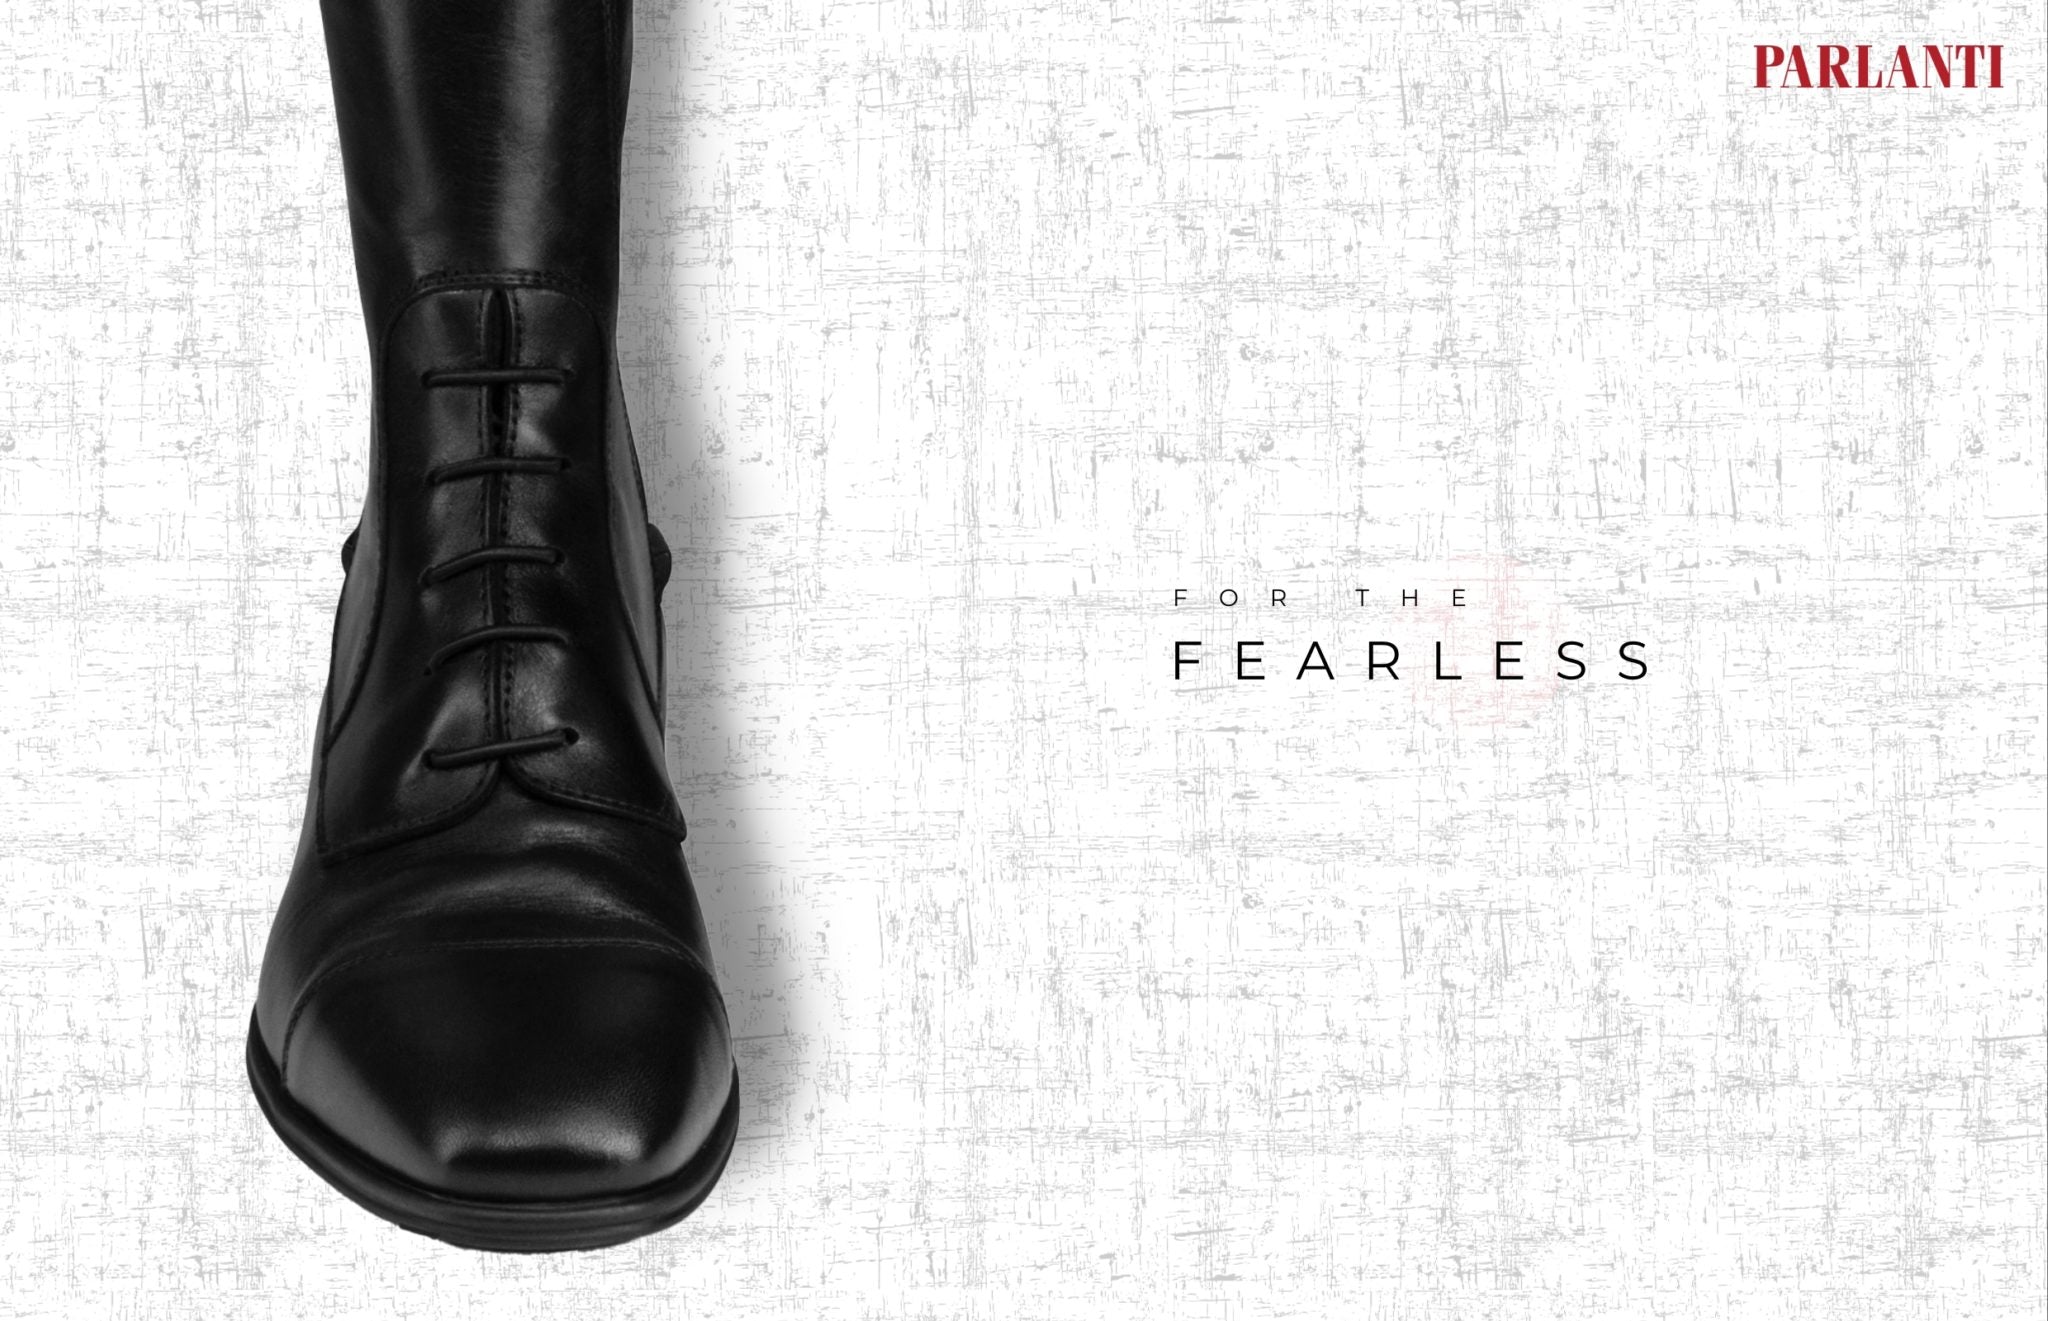 Parlanti: For The Fearless